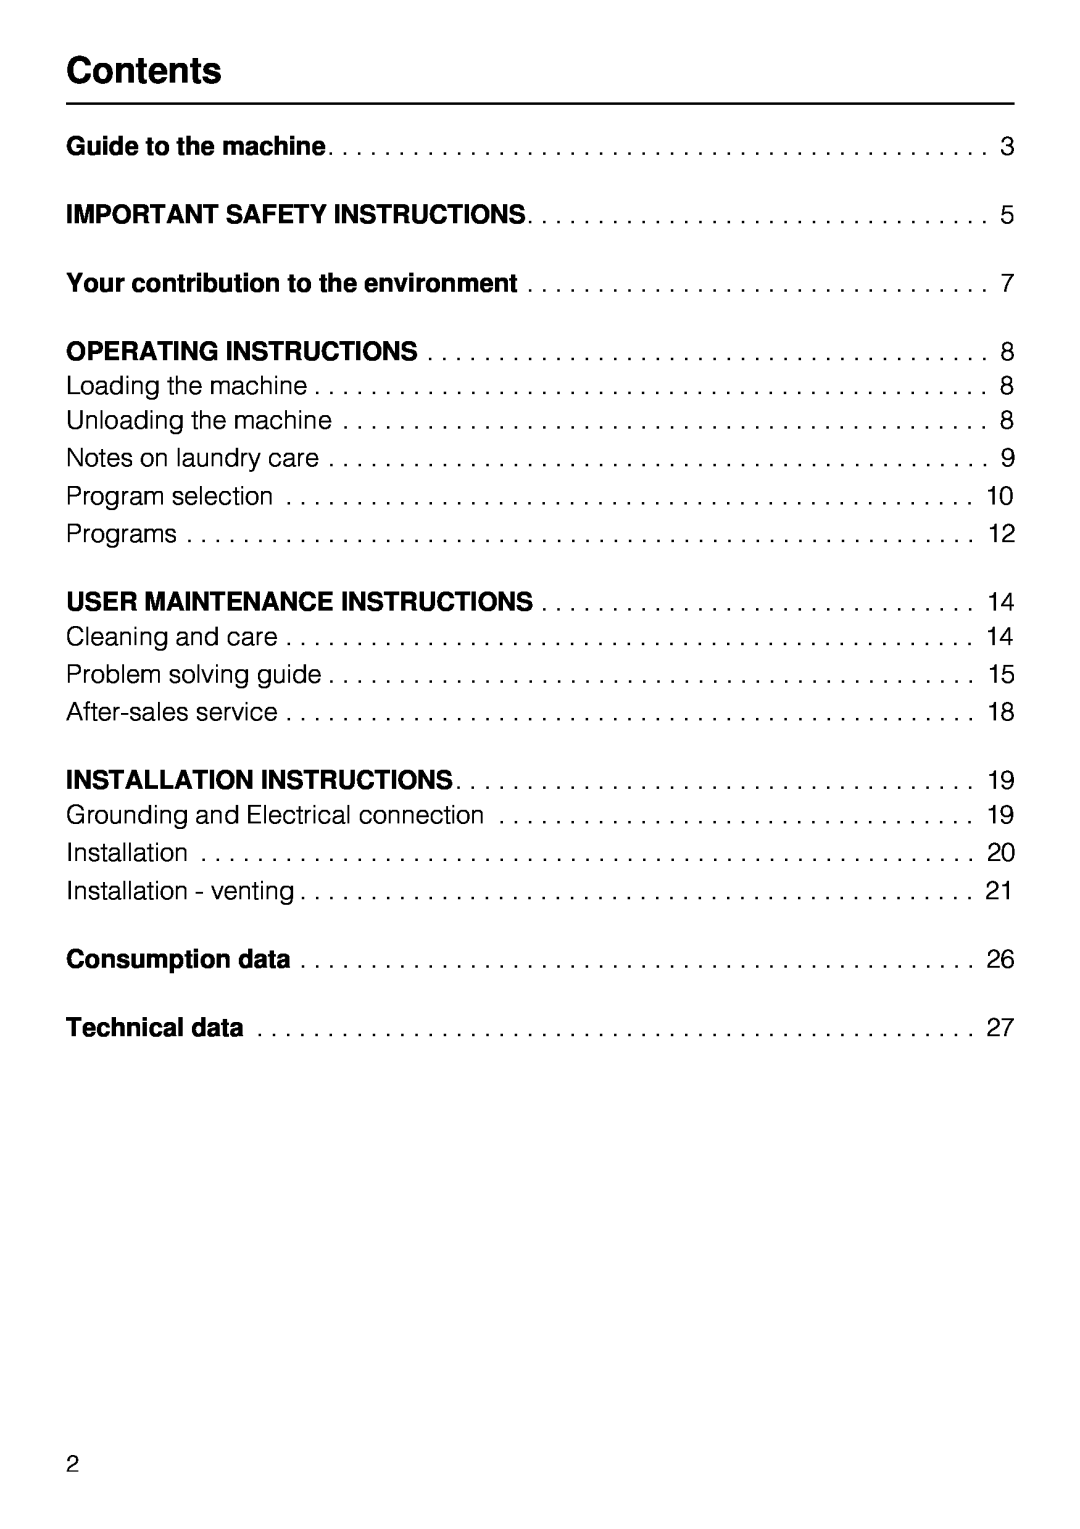 Miele T 1515 Contents, Guide to the machine IMPORTANT SAFETY INSTRUCTIONS, Your contribution to the environment 